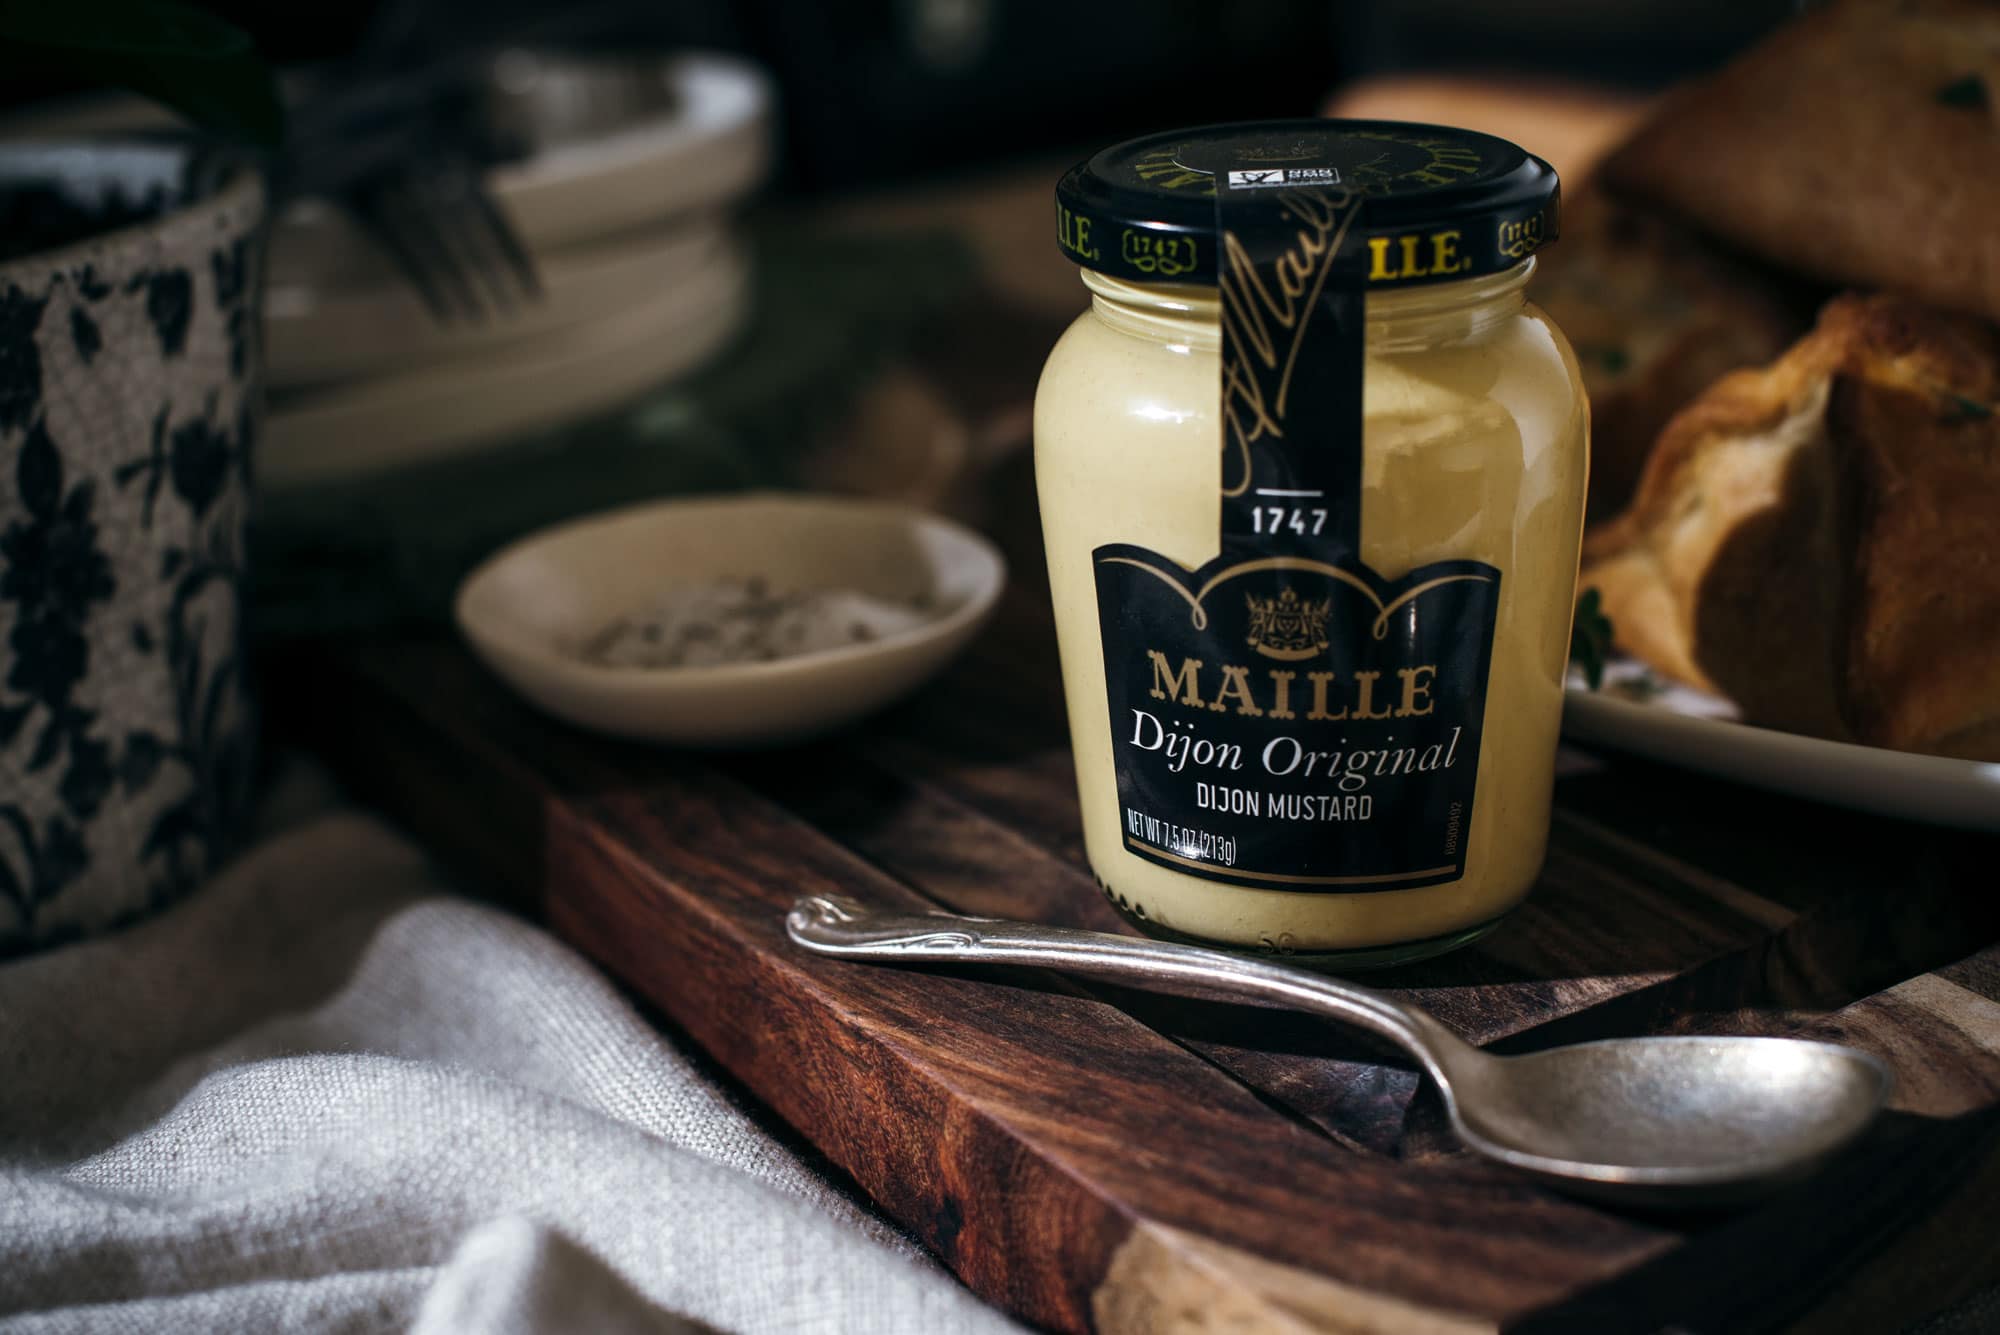 Jar of Maille Dijon Originale Mustard with serving spoon on wooden board